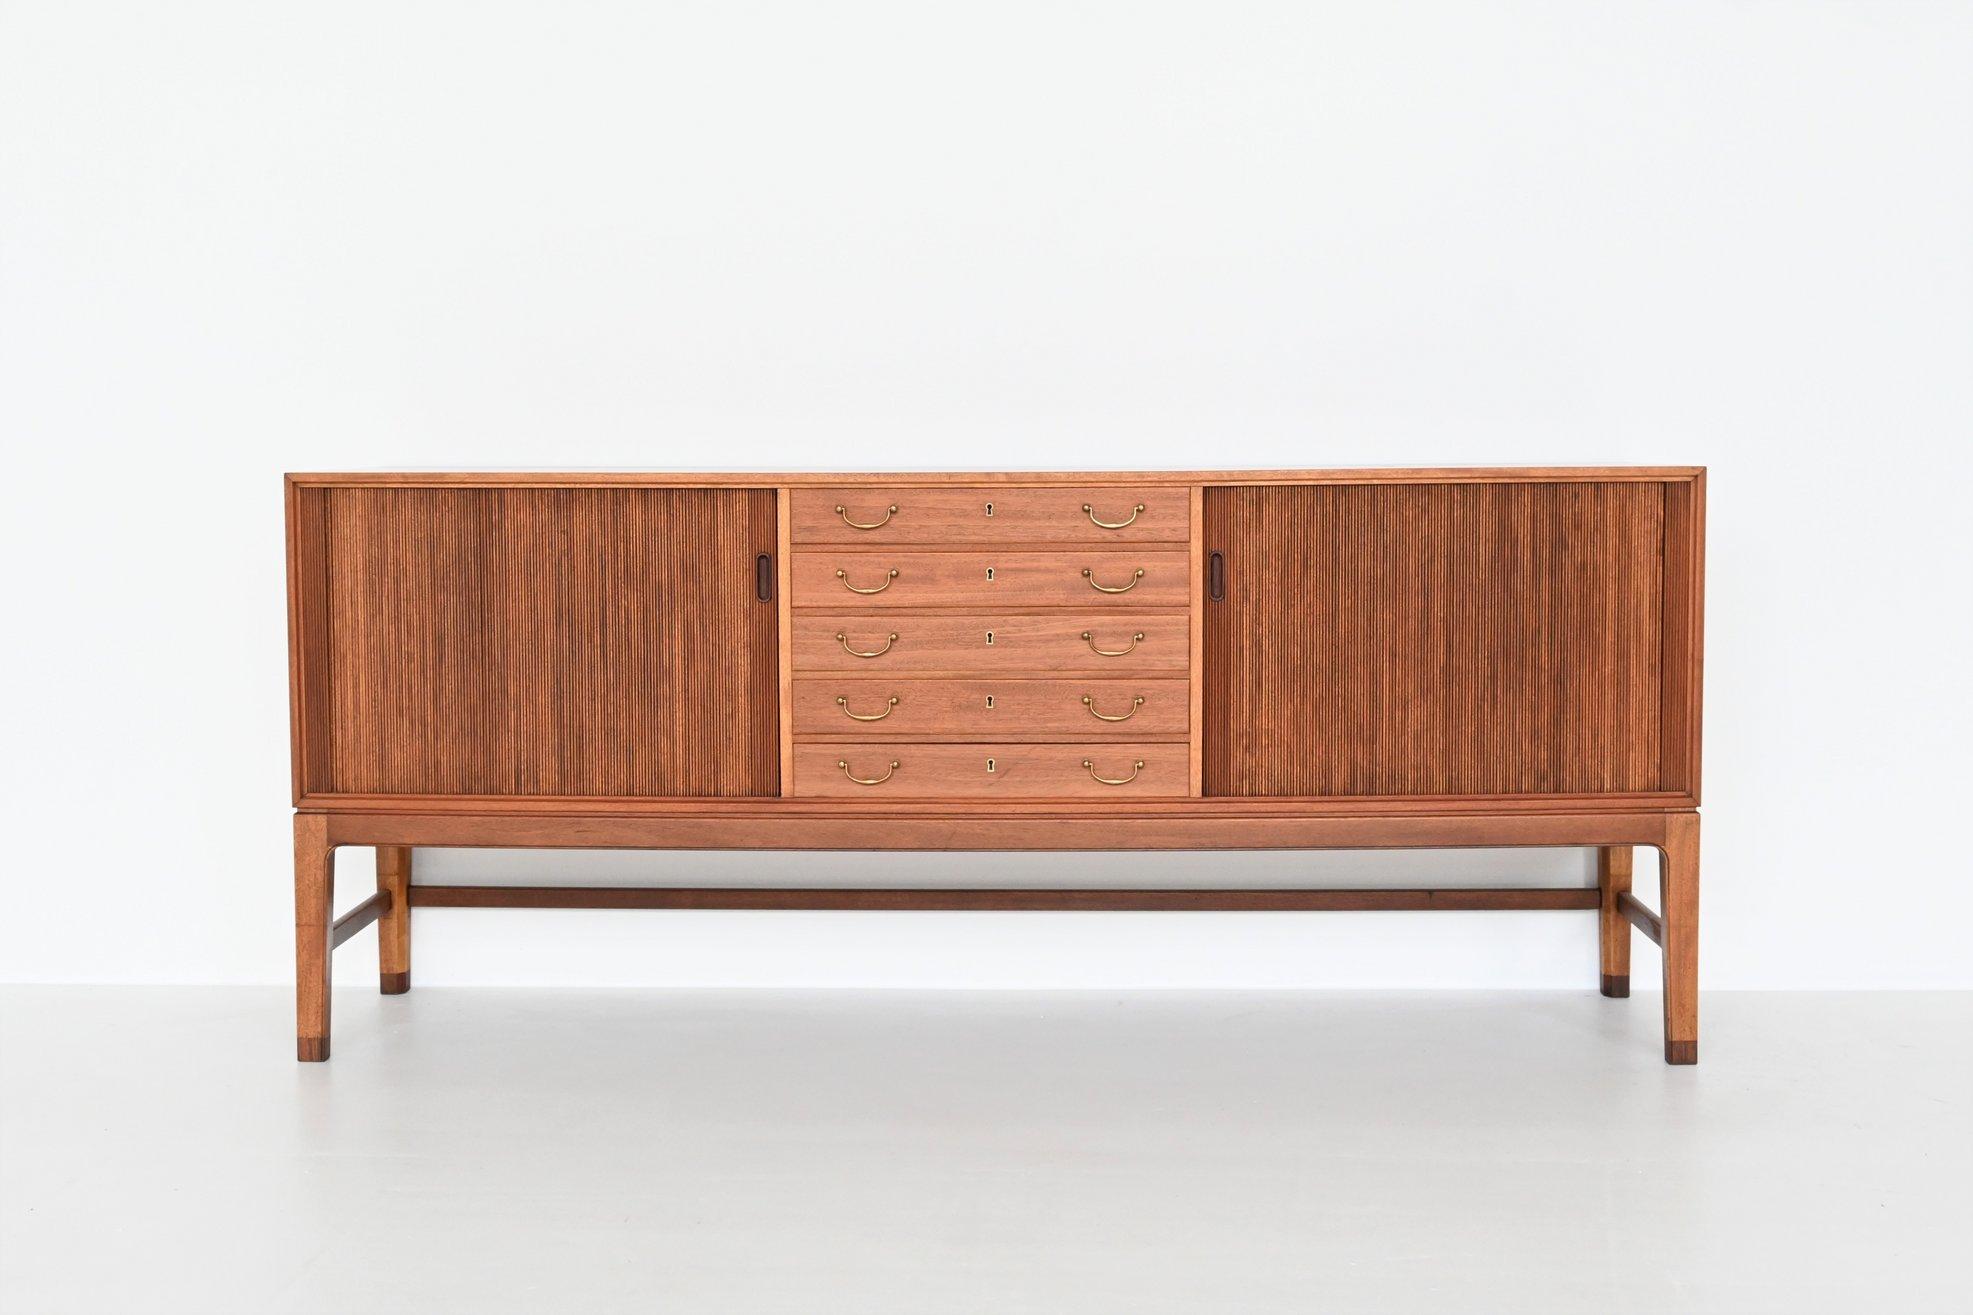 Beautiful elegant sideboard designed by Ole Wanscher and manufactured by A.J. Iversen, Denmark 1940. This well-crafted sideboard features five centered drawers with brass handles and tambour doors on either side hiding shelves inside. The lines of